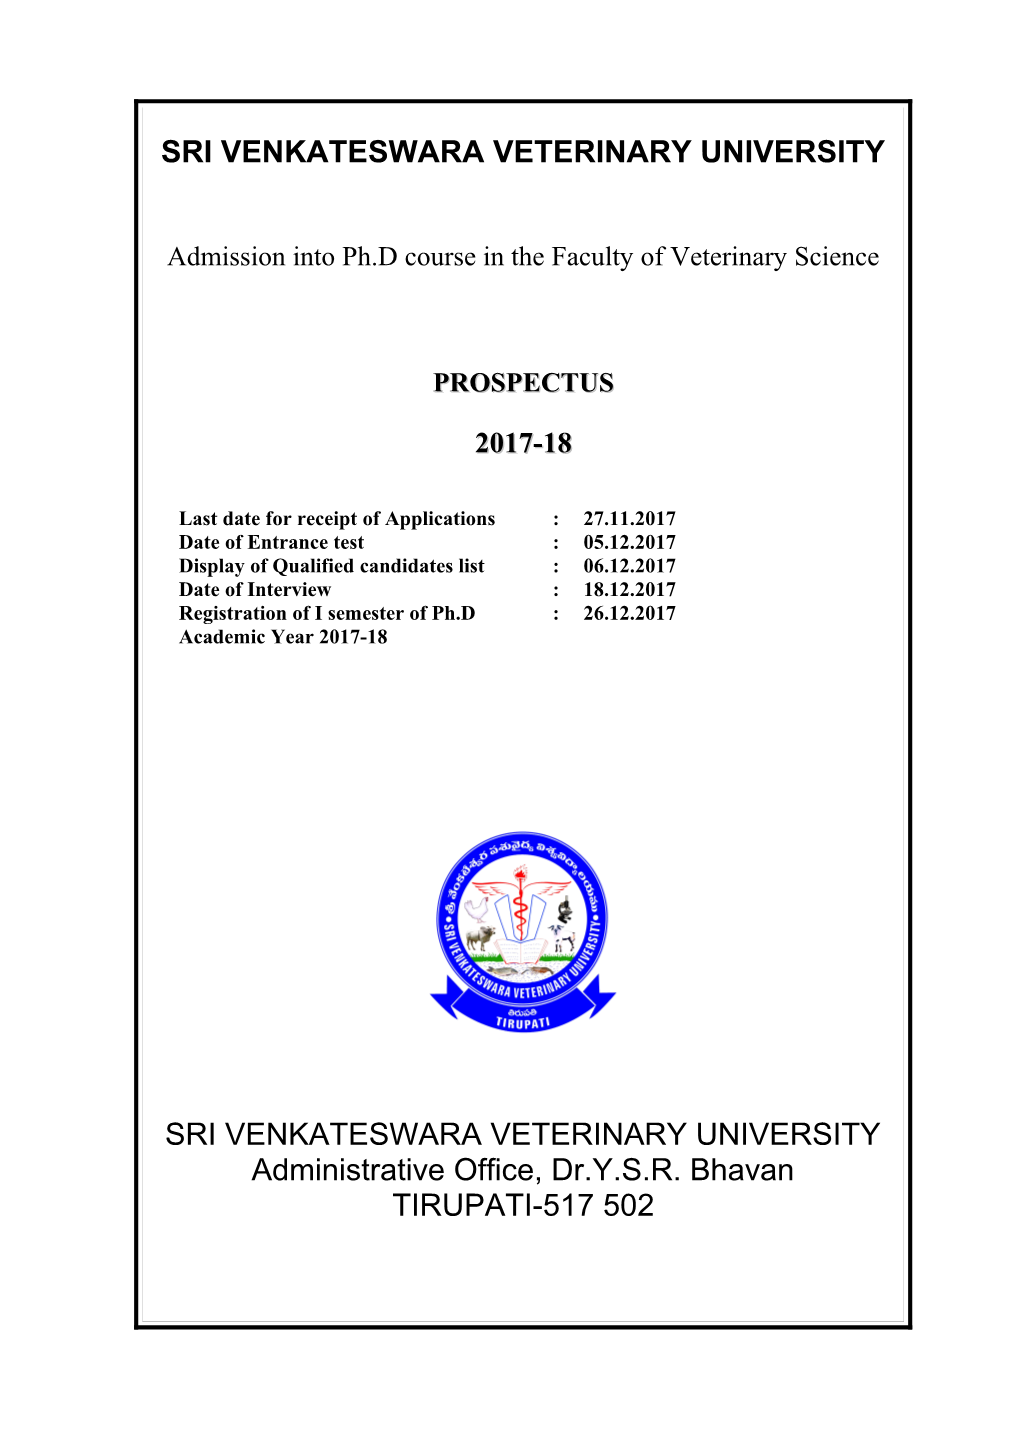 Admission Into Ph.D Course in the Faculty of Veterinary Science